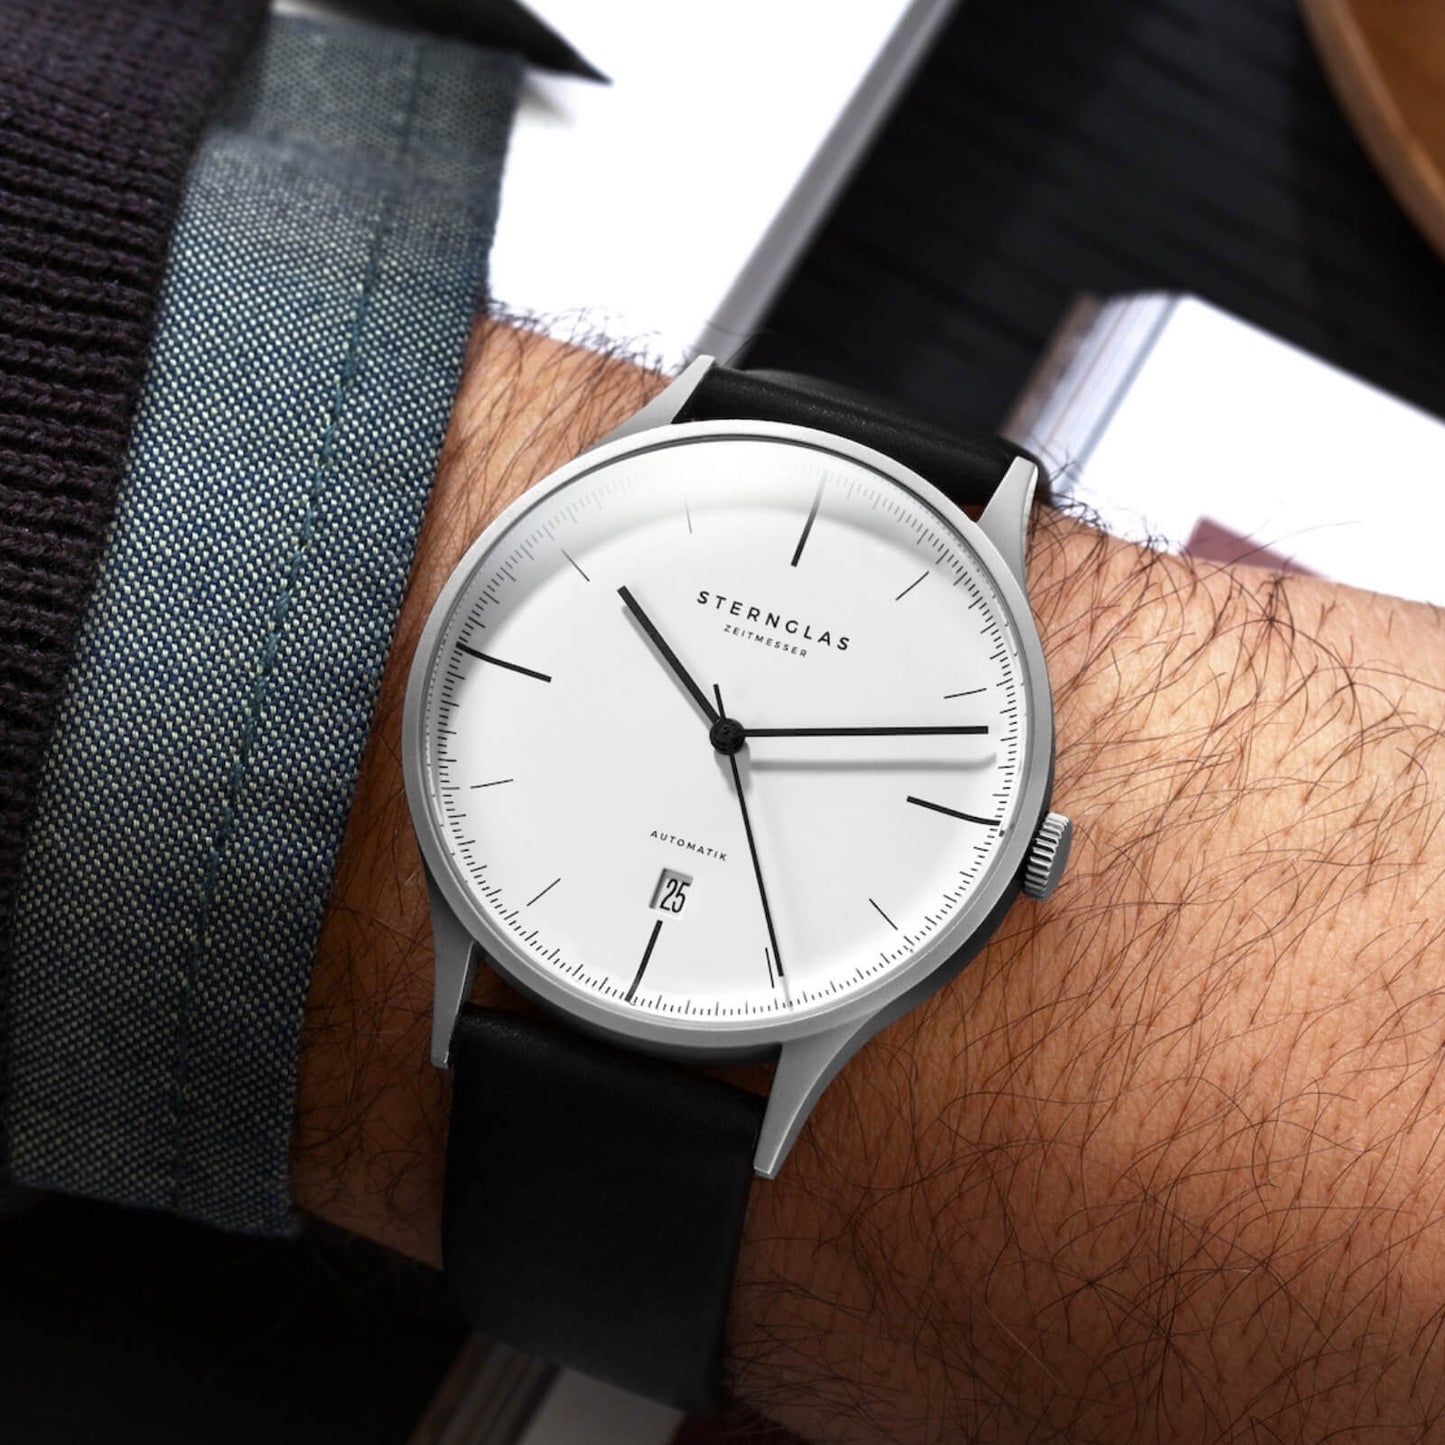 popup|Fits under any shirt sleeve|The particularly flat case design makes the Asthet the ideal automatic dress watch for everyday wear. 